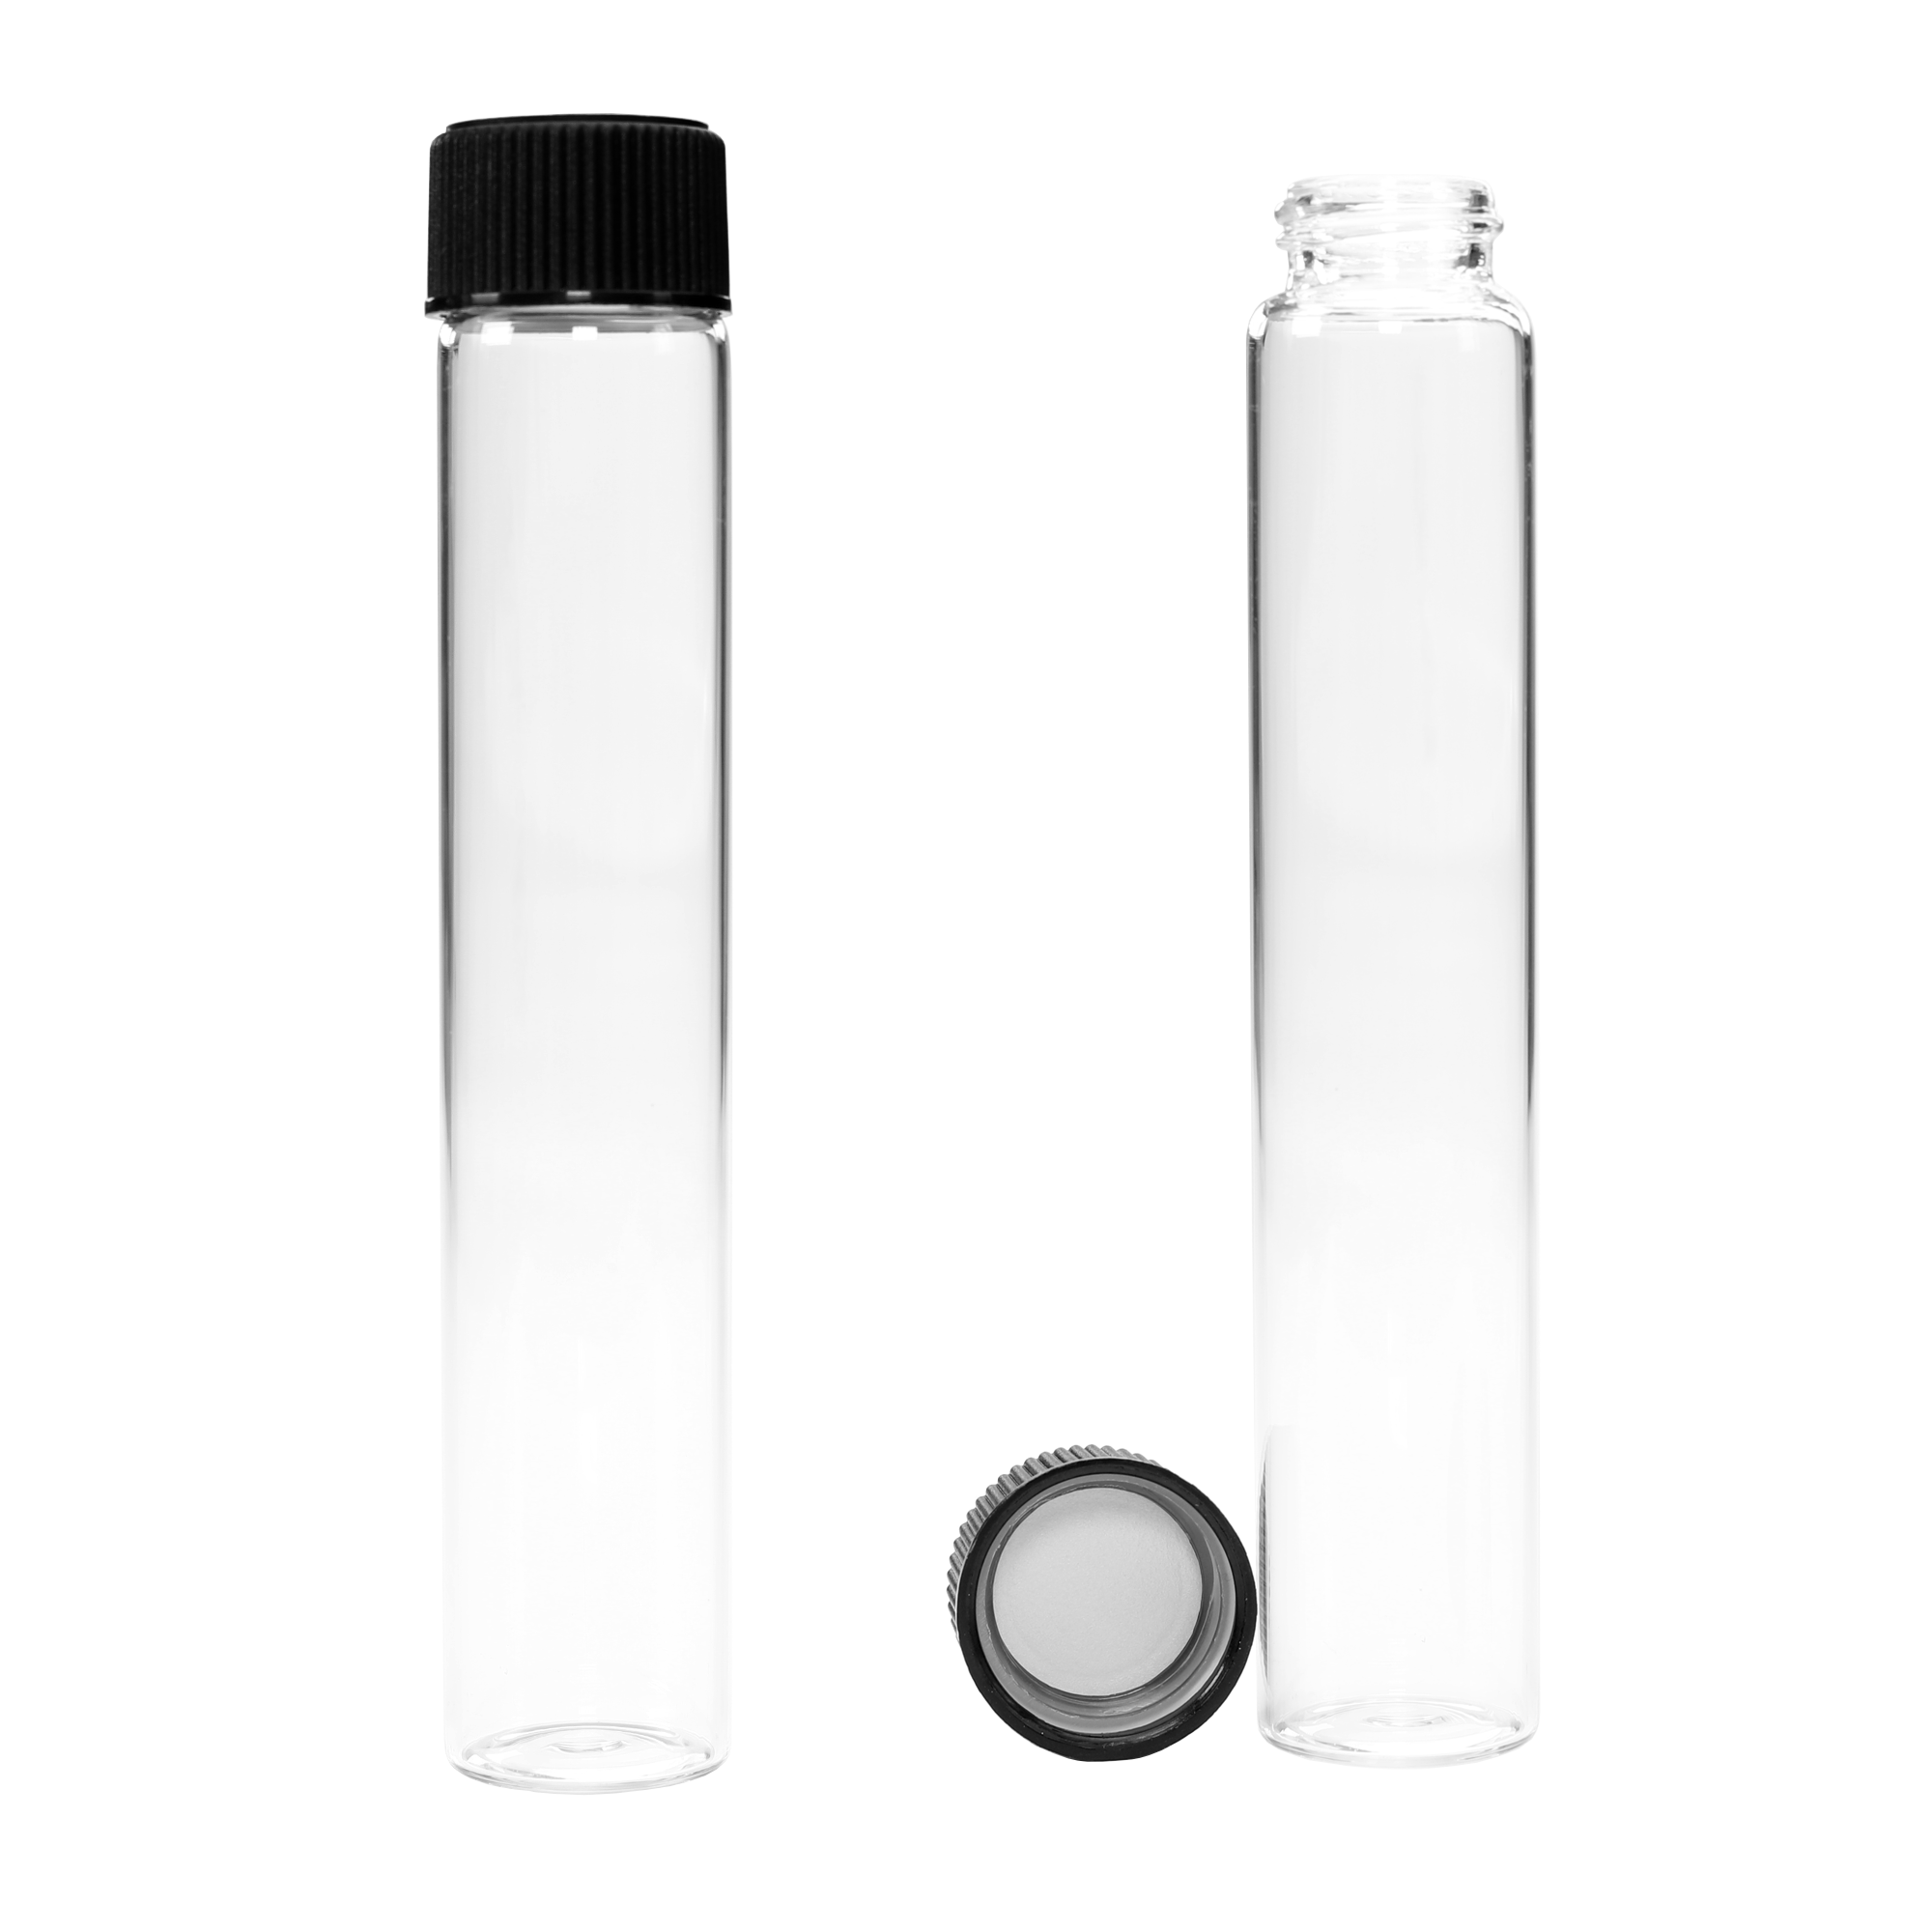 3.3 Clear Glass Pre Roll Tube, Black Pictorial Child Resistant Cap, 20mm  20-400